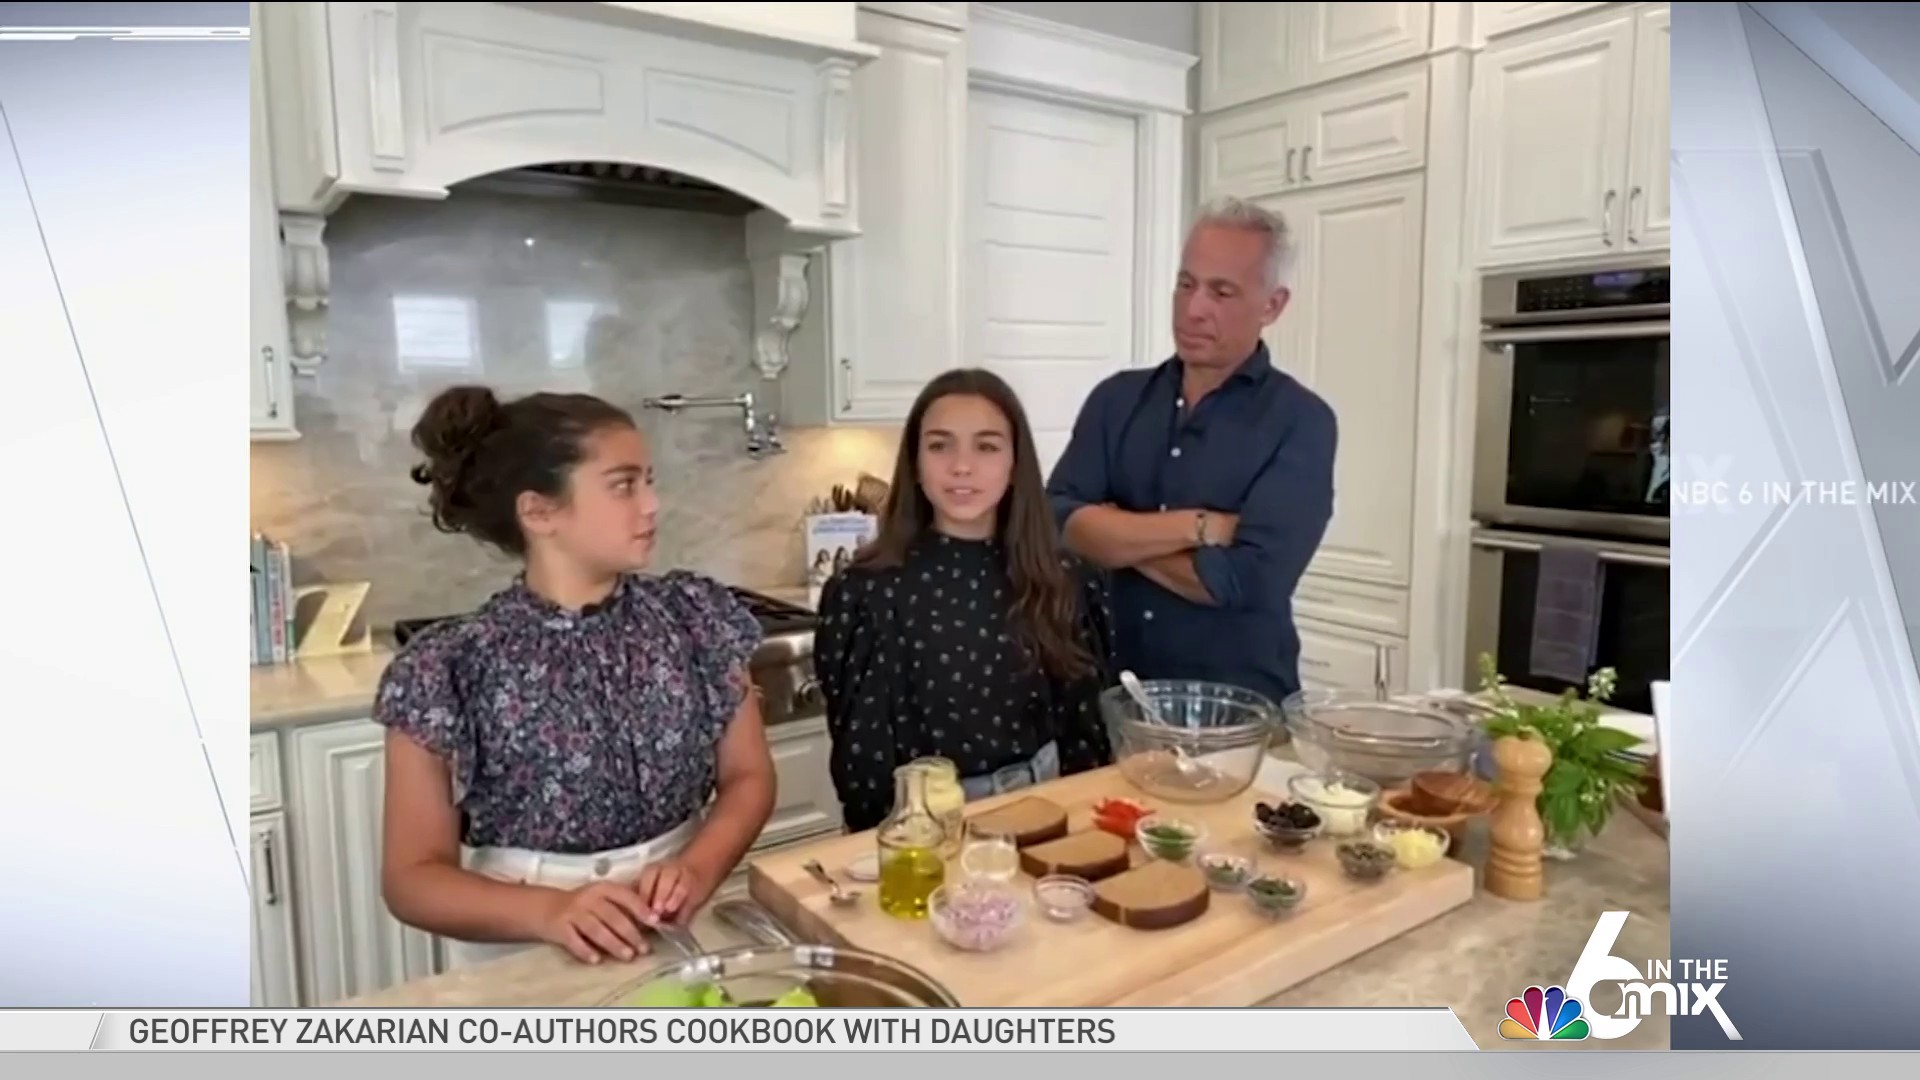 Geoffrey Zakarian on Instagram: “It's my first Sunday on @qvc in